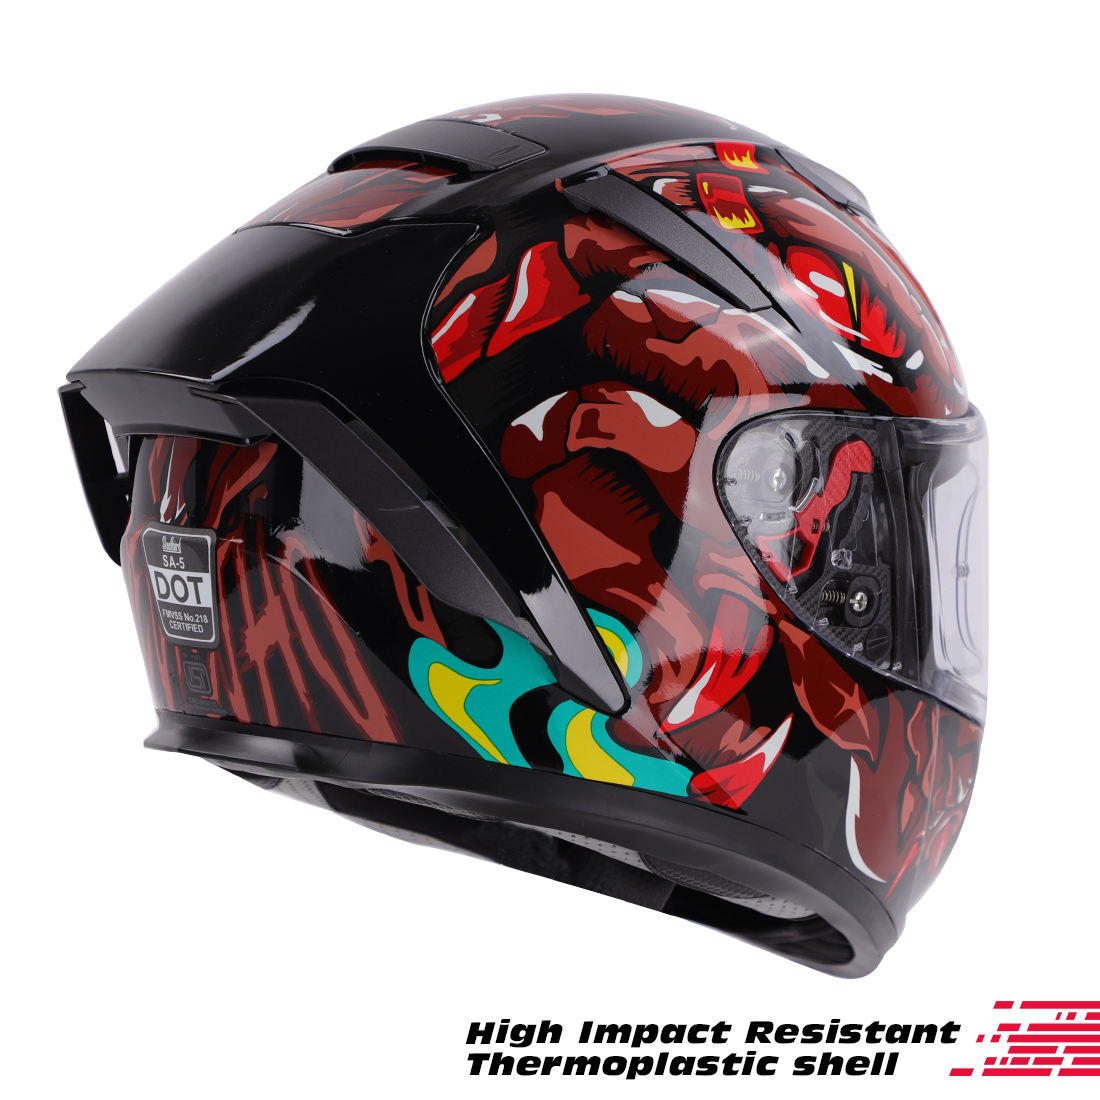 Steelbird SA-5 Monster ISI/DOT Certified Full Face Graphic Helmet With Outer Anti-Fog Clear Visor (Glossy Black Red)